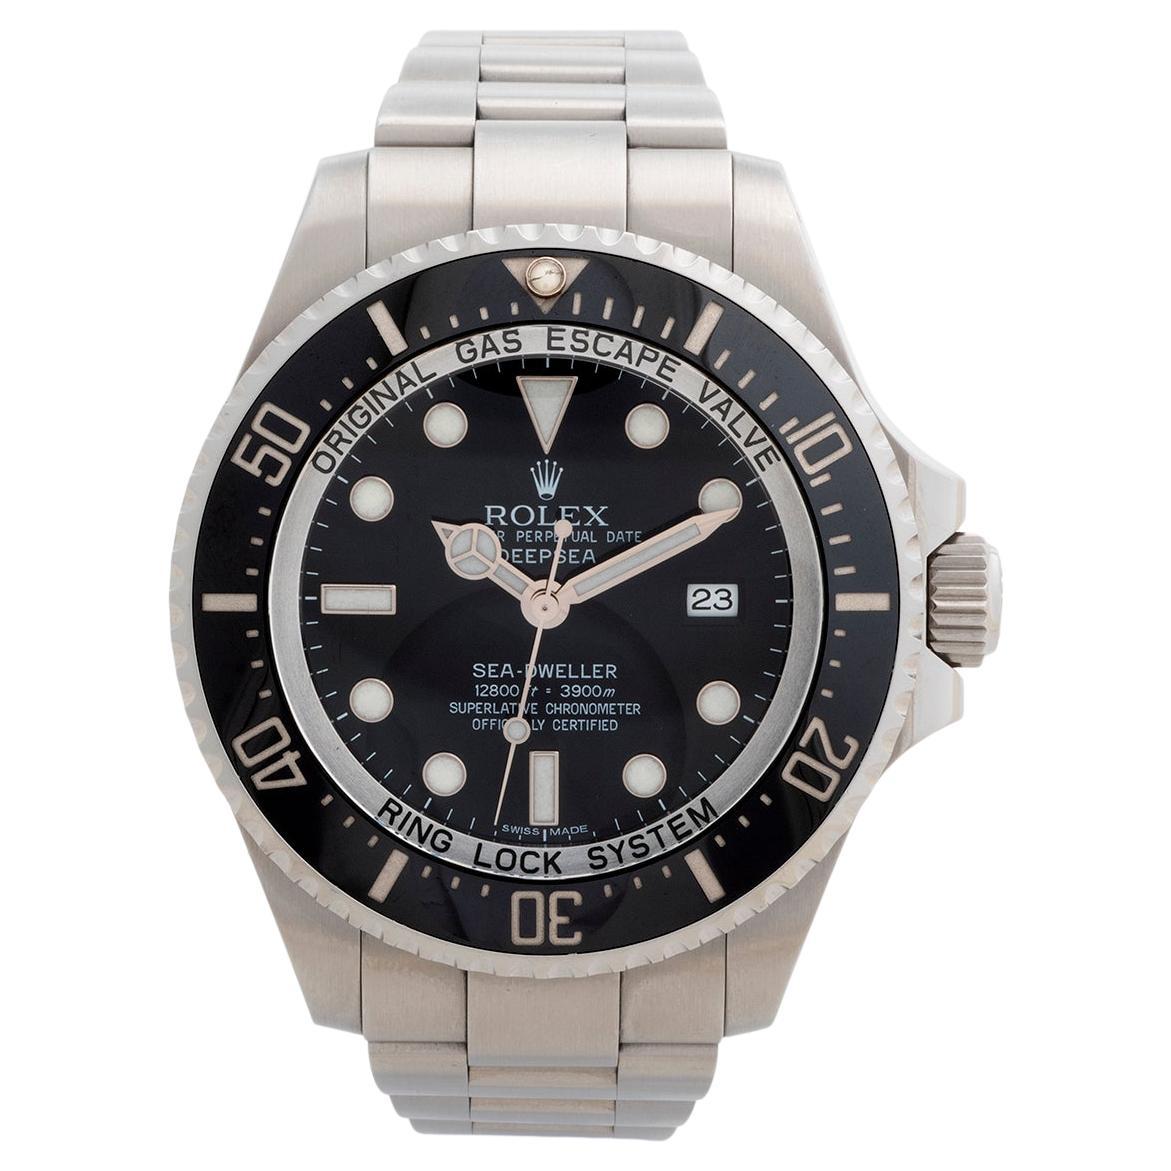 Our Rolex Deepsea Seadweller , reference 116660 , with 44mm stainless steel case and stainless steel bracelet is presented in excellent condition with only light signs of use from new, of note to the clasp. Our Rolex Deep Sea comes with inner and